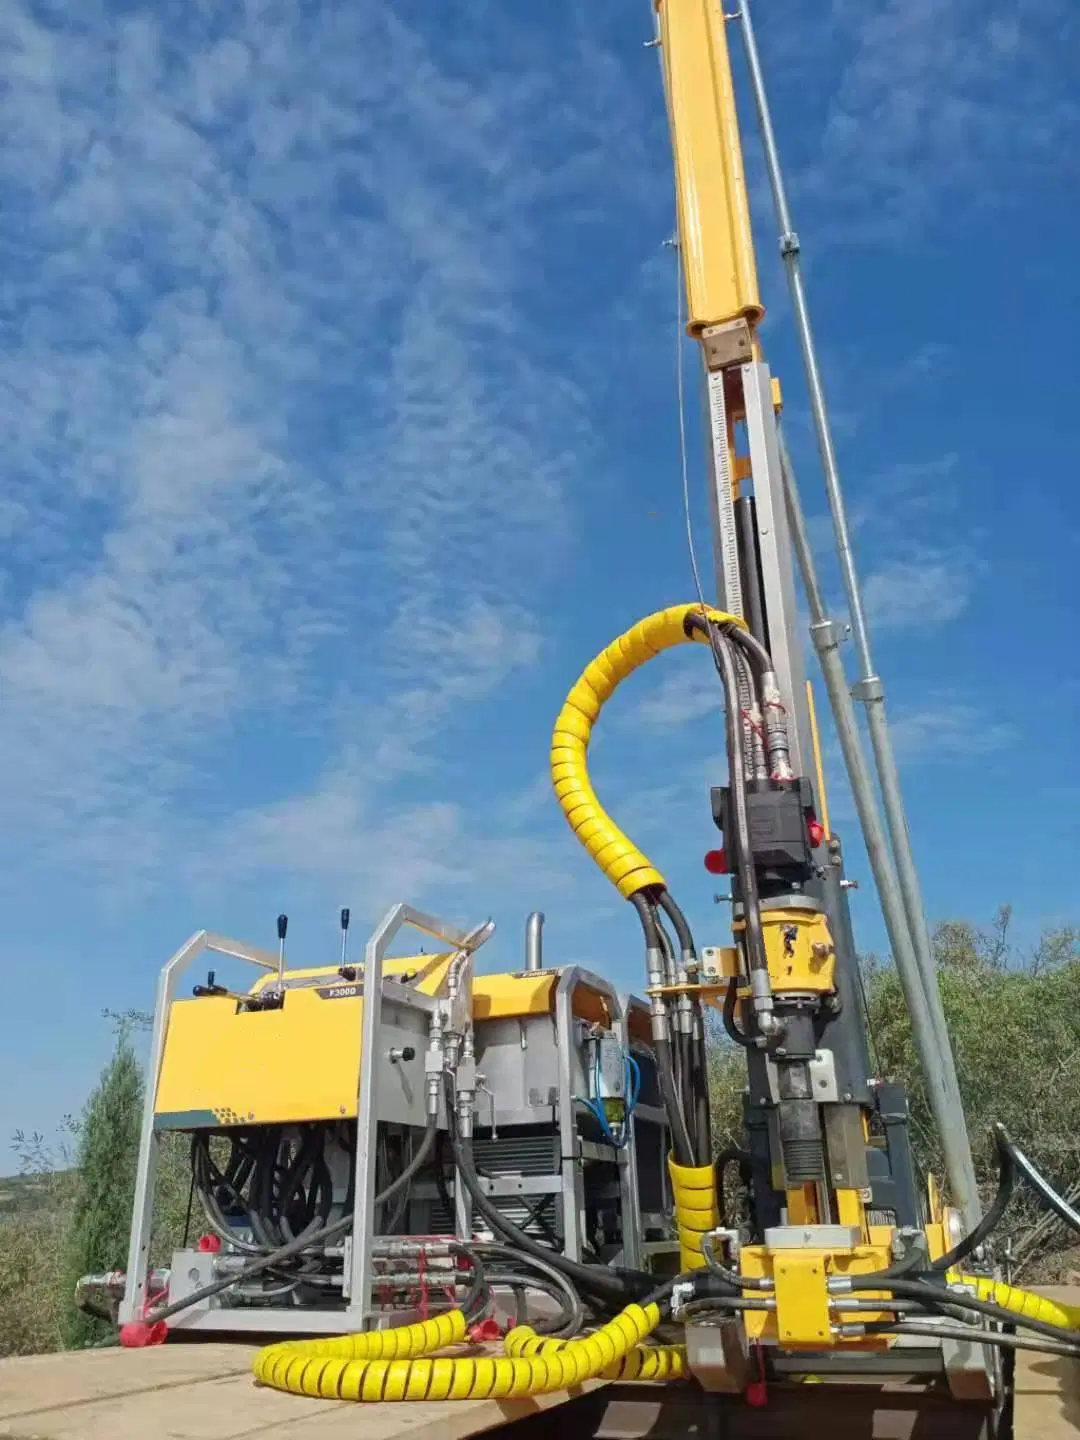 Skid Crawler Truck Mounted Surface Underground Multifunctional Hydraulic Diamond Drilling Portable PDC Drill Geological Core Exploration Core Coring Rig Drill